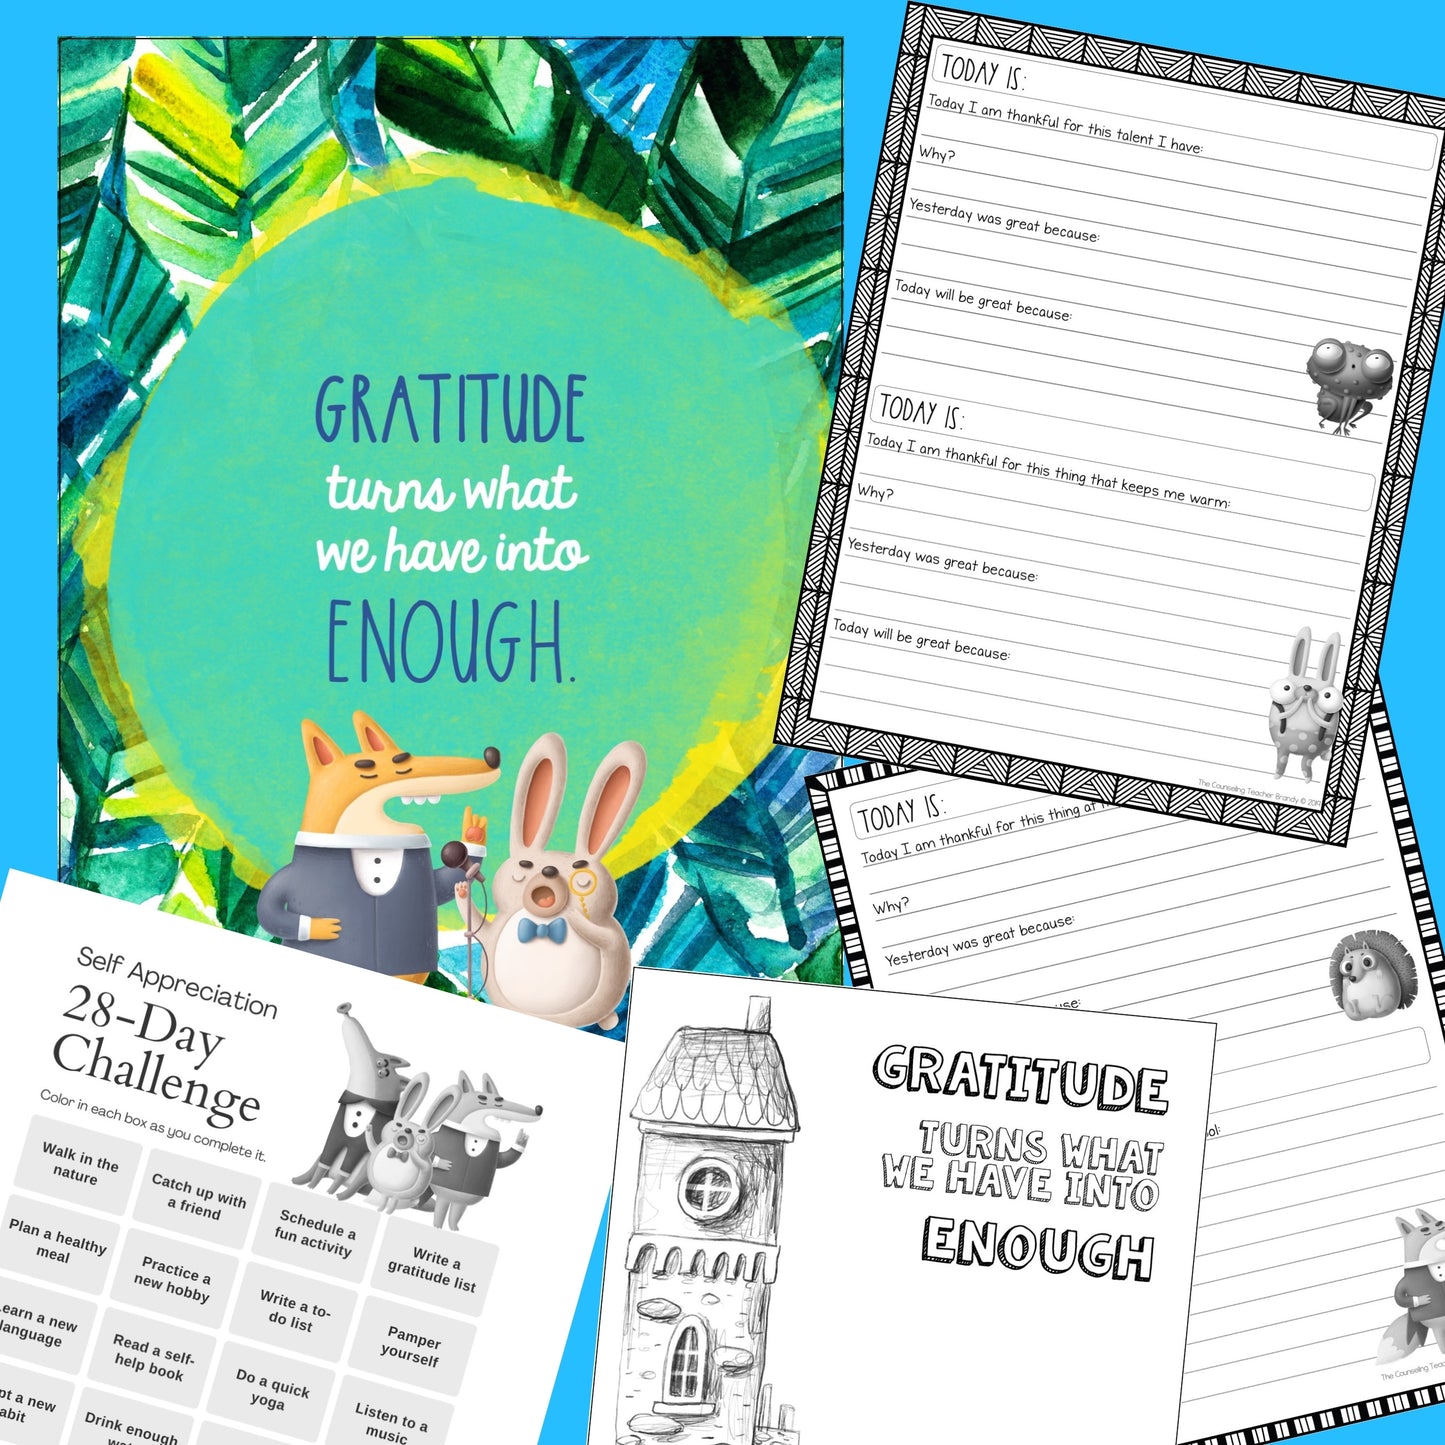 3 Minute Daily Gratitude Journal for Kids